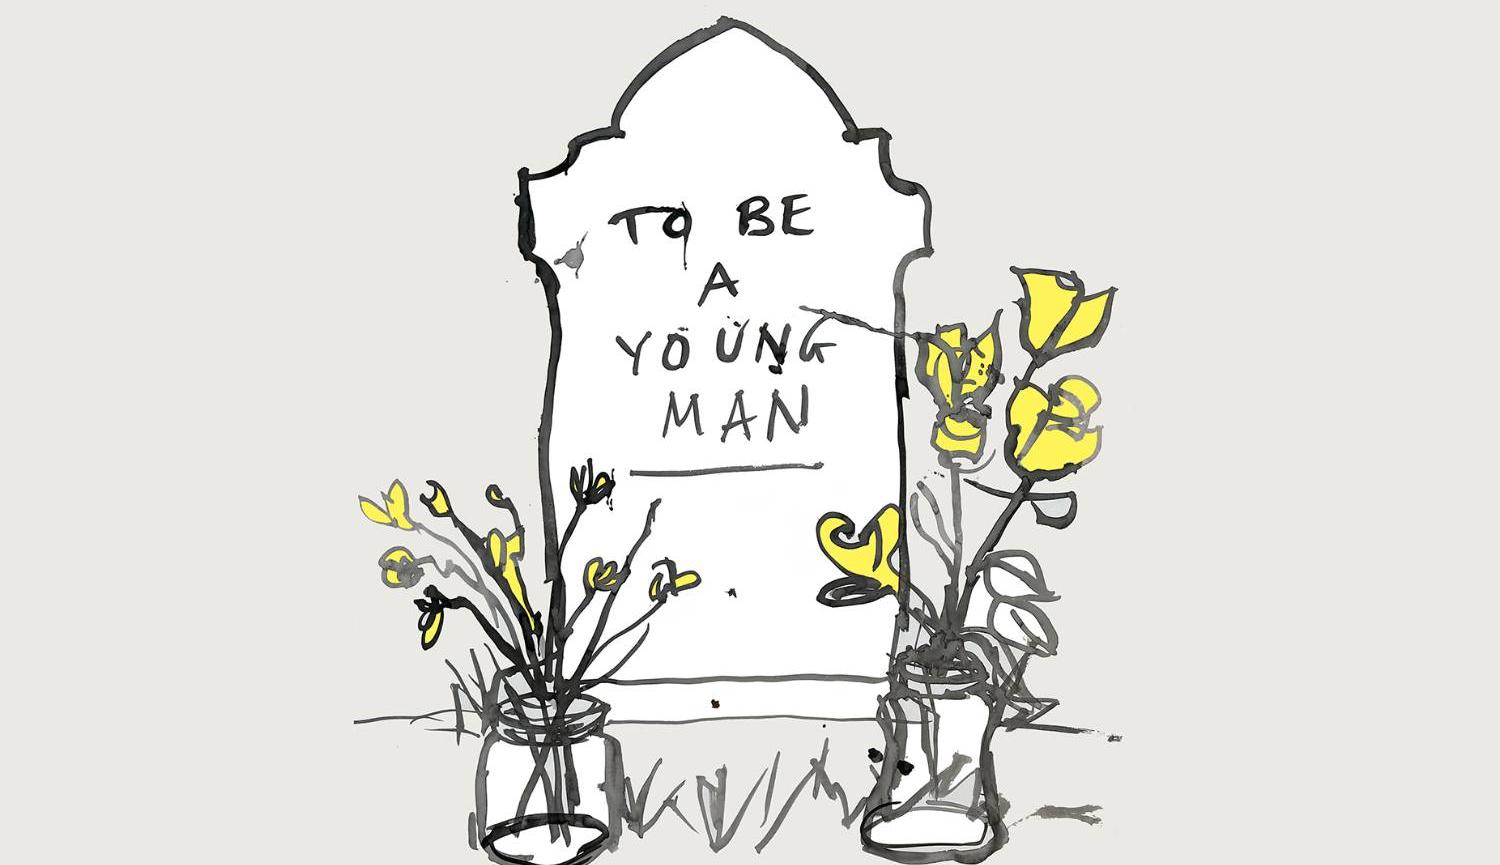 An illustration of a gravestone with yellow flowers in front of it  -the wordsTo Be A Young Man written on the gravestone